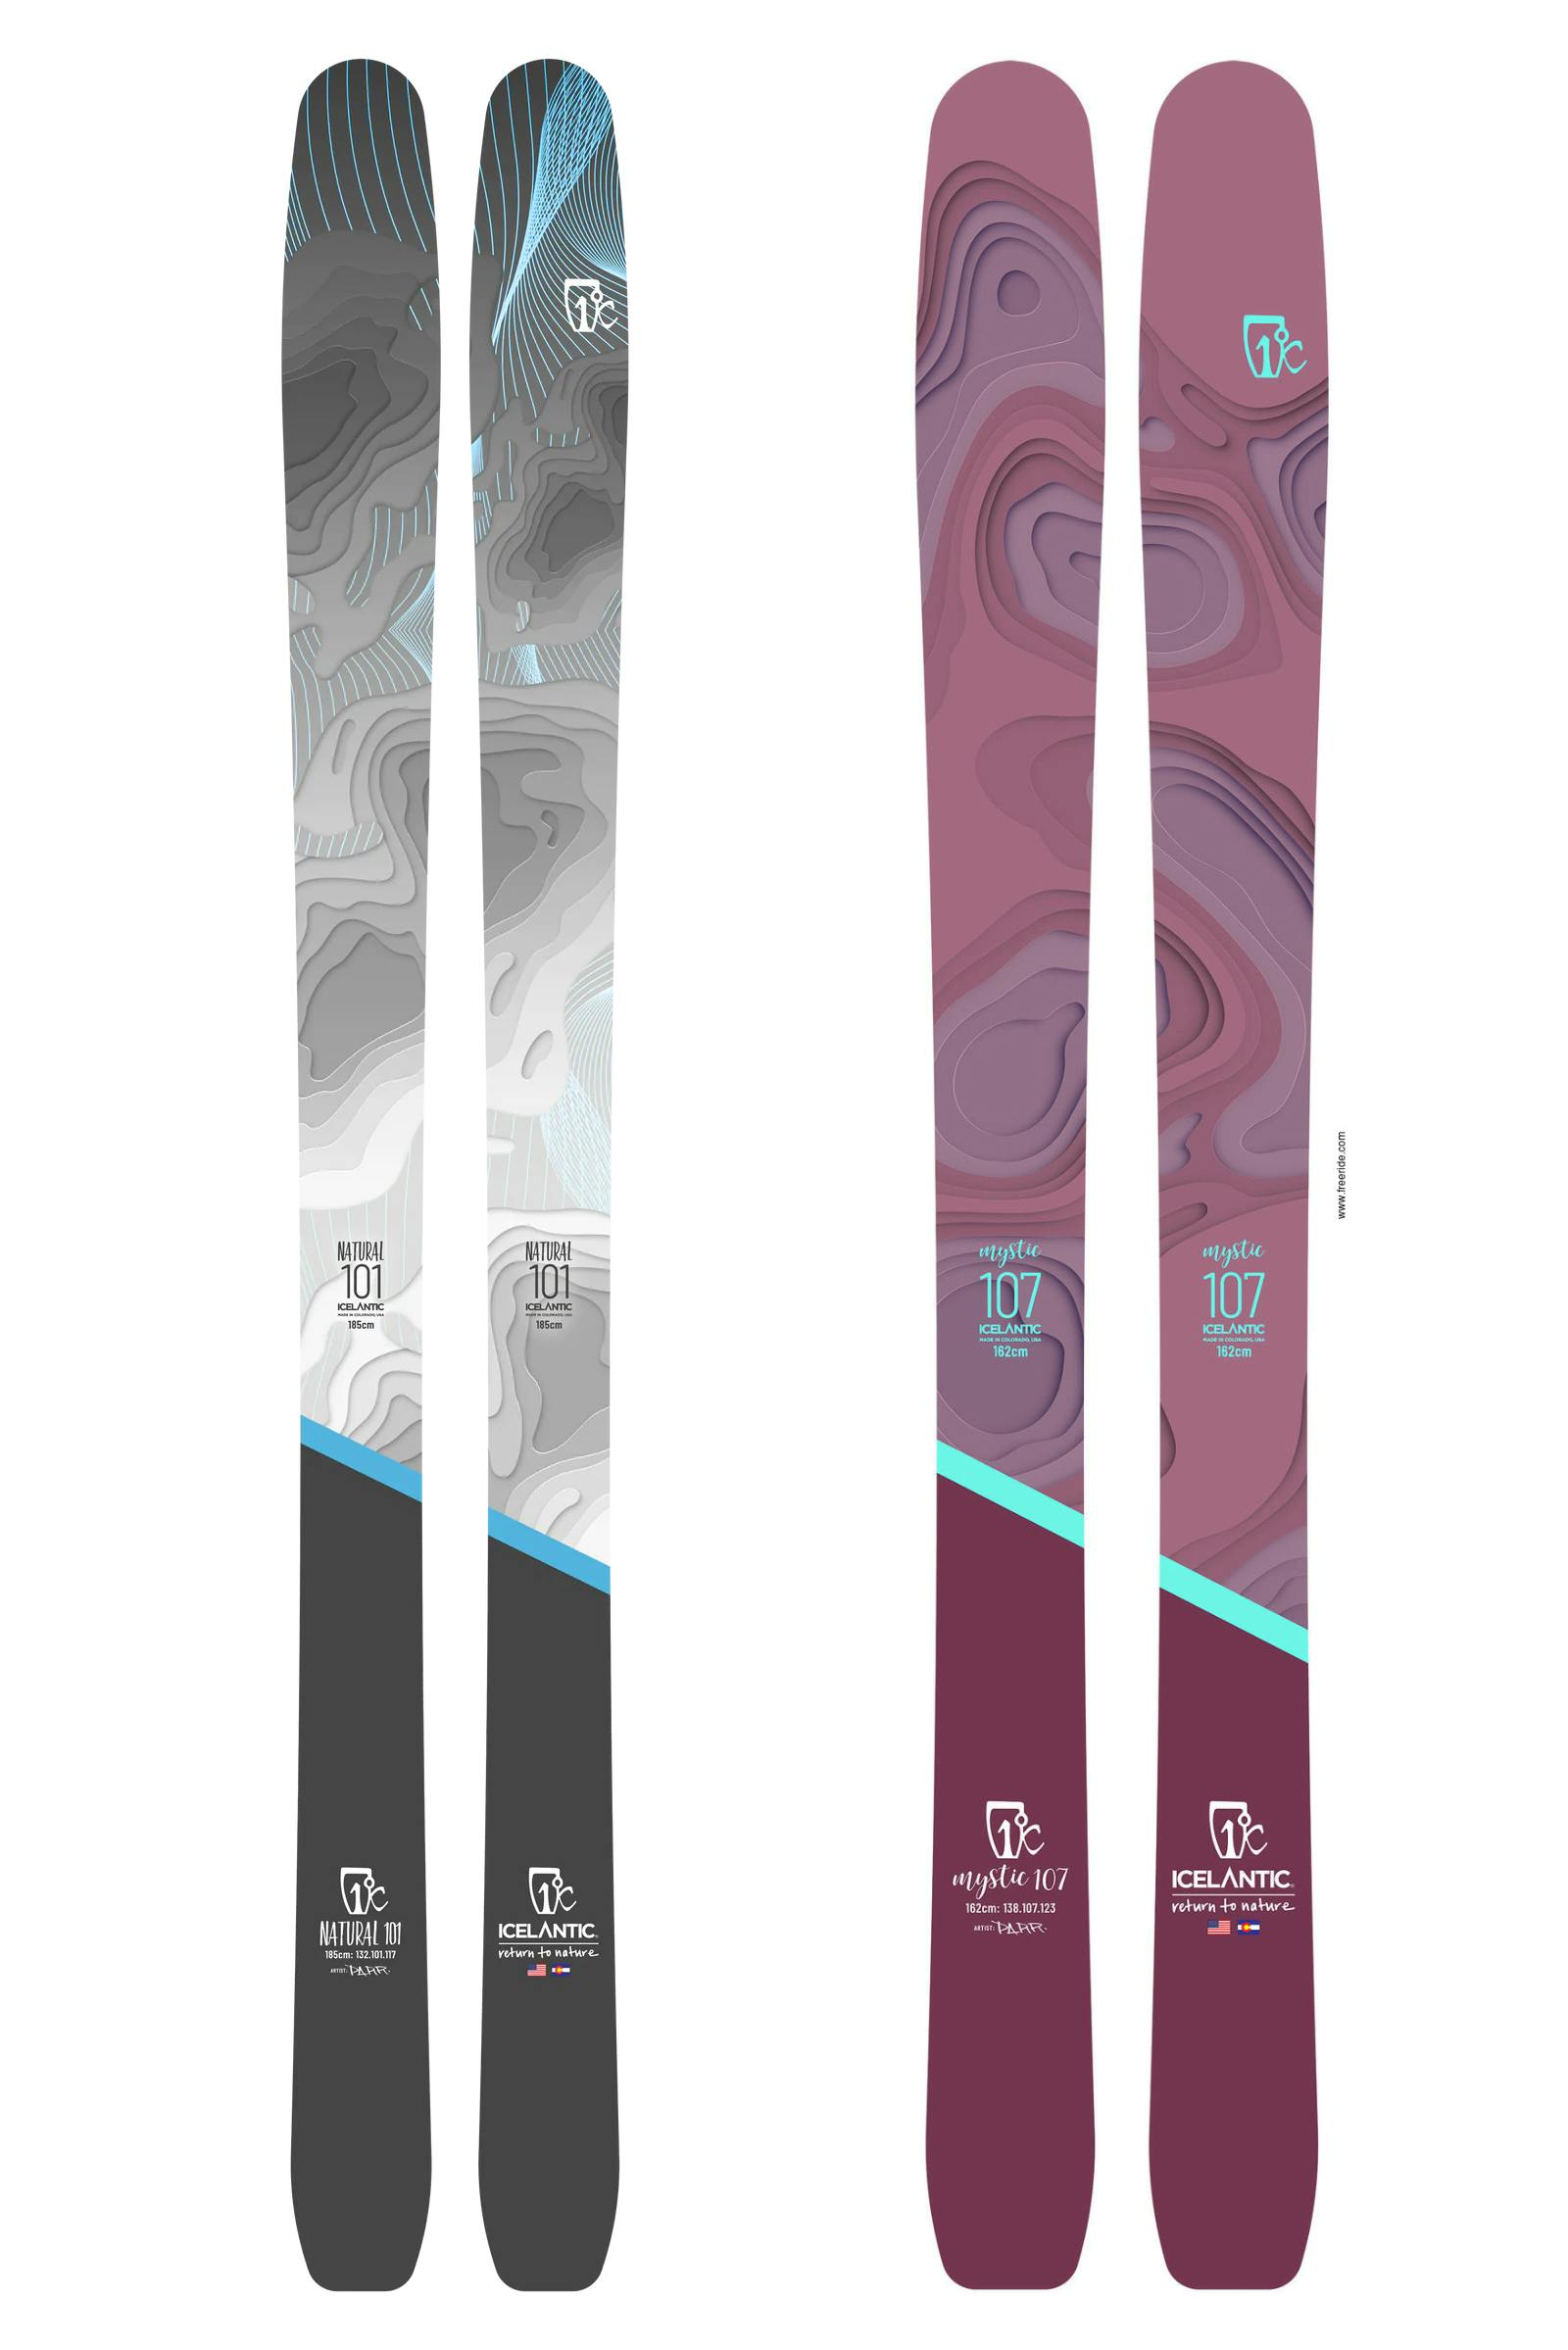 Product image of Natural 101 and Mystic 107 skis